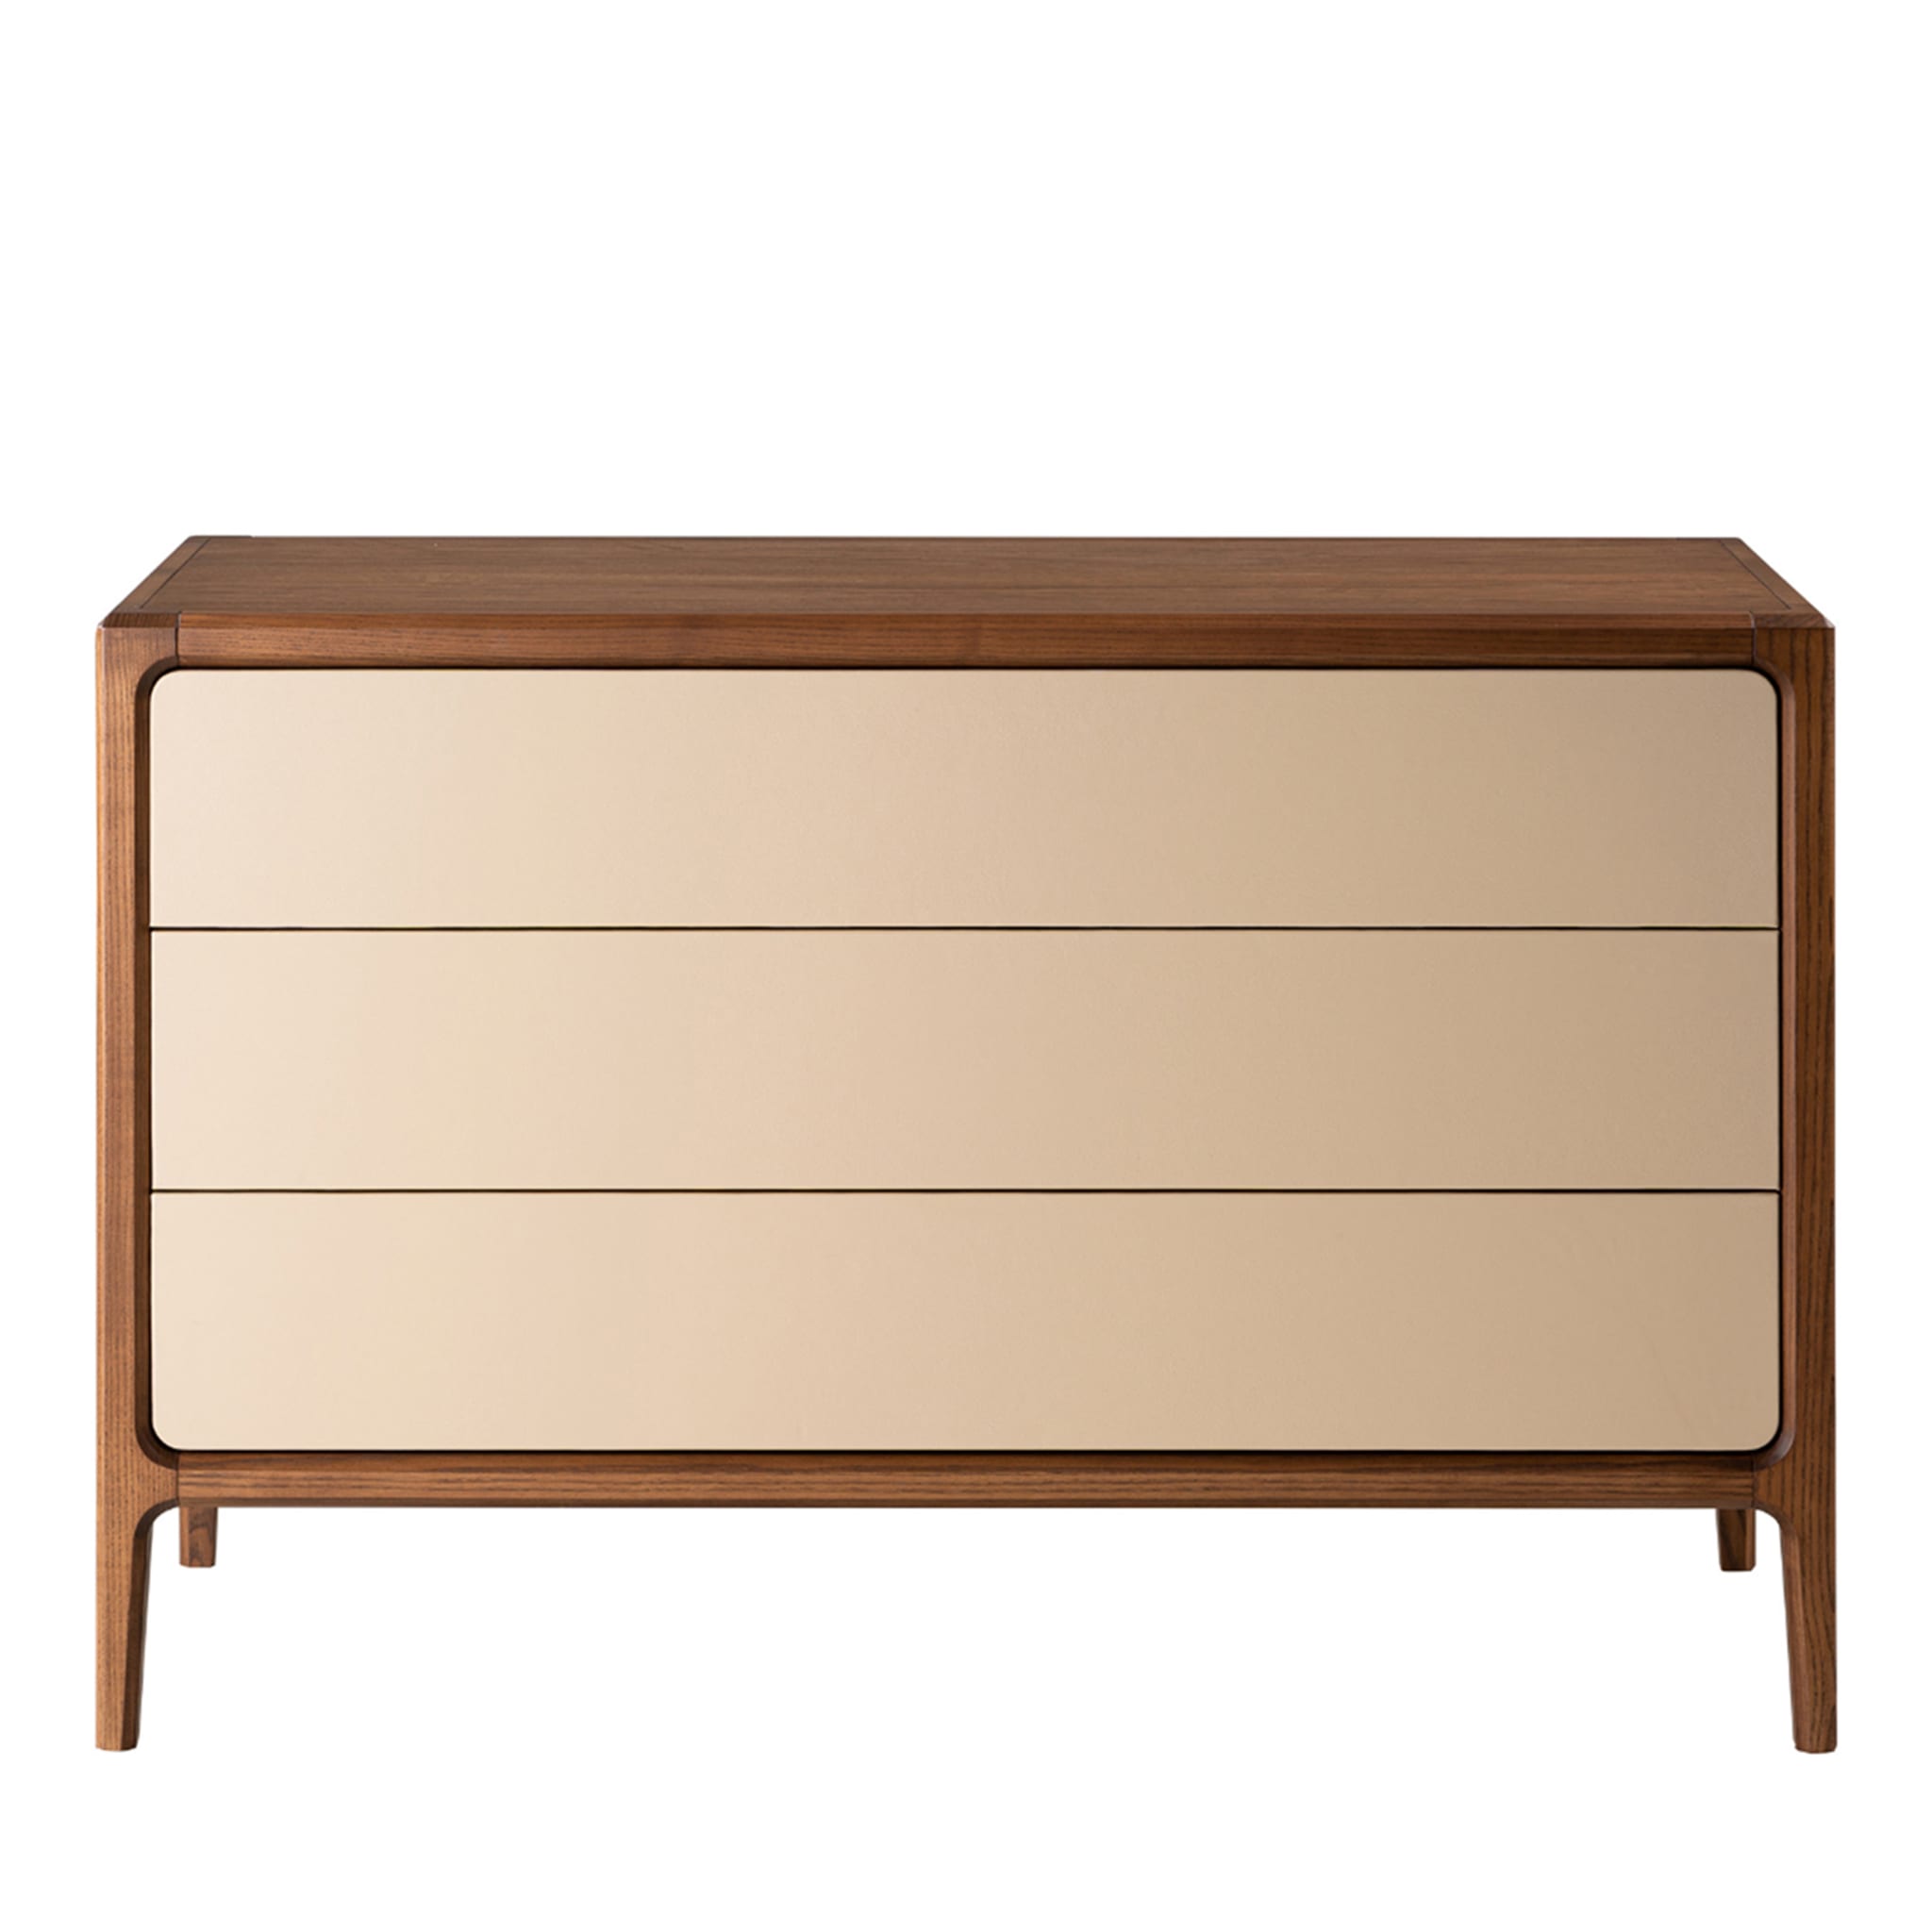 1201/F 3-Drawer Beige Leather-Covered Dresser by Libero Rutilo - Main view